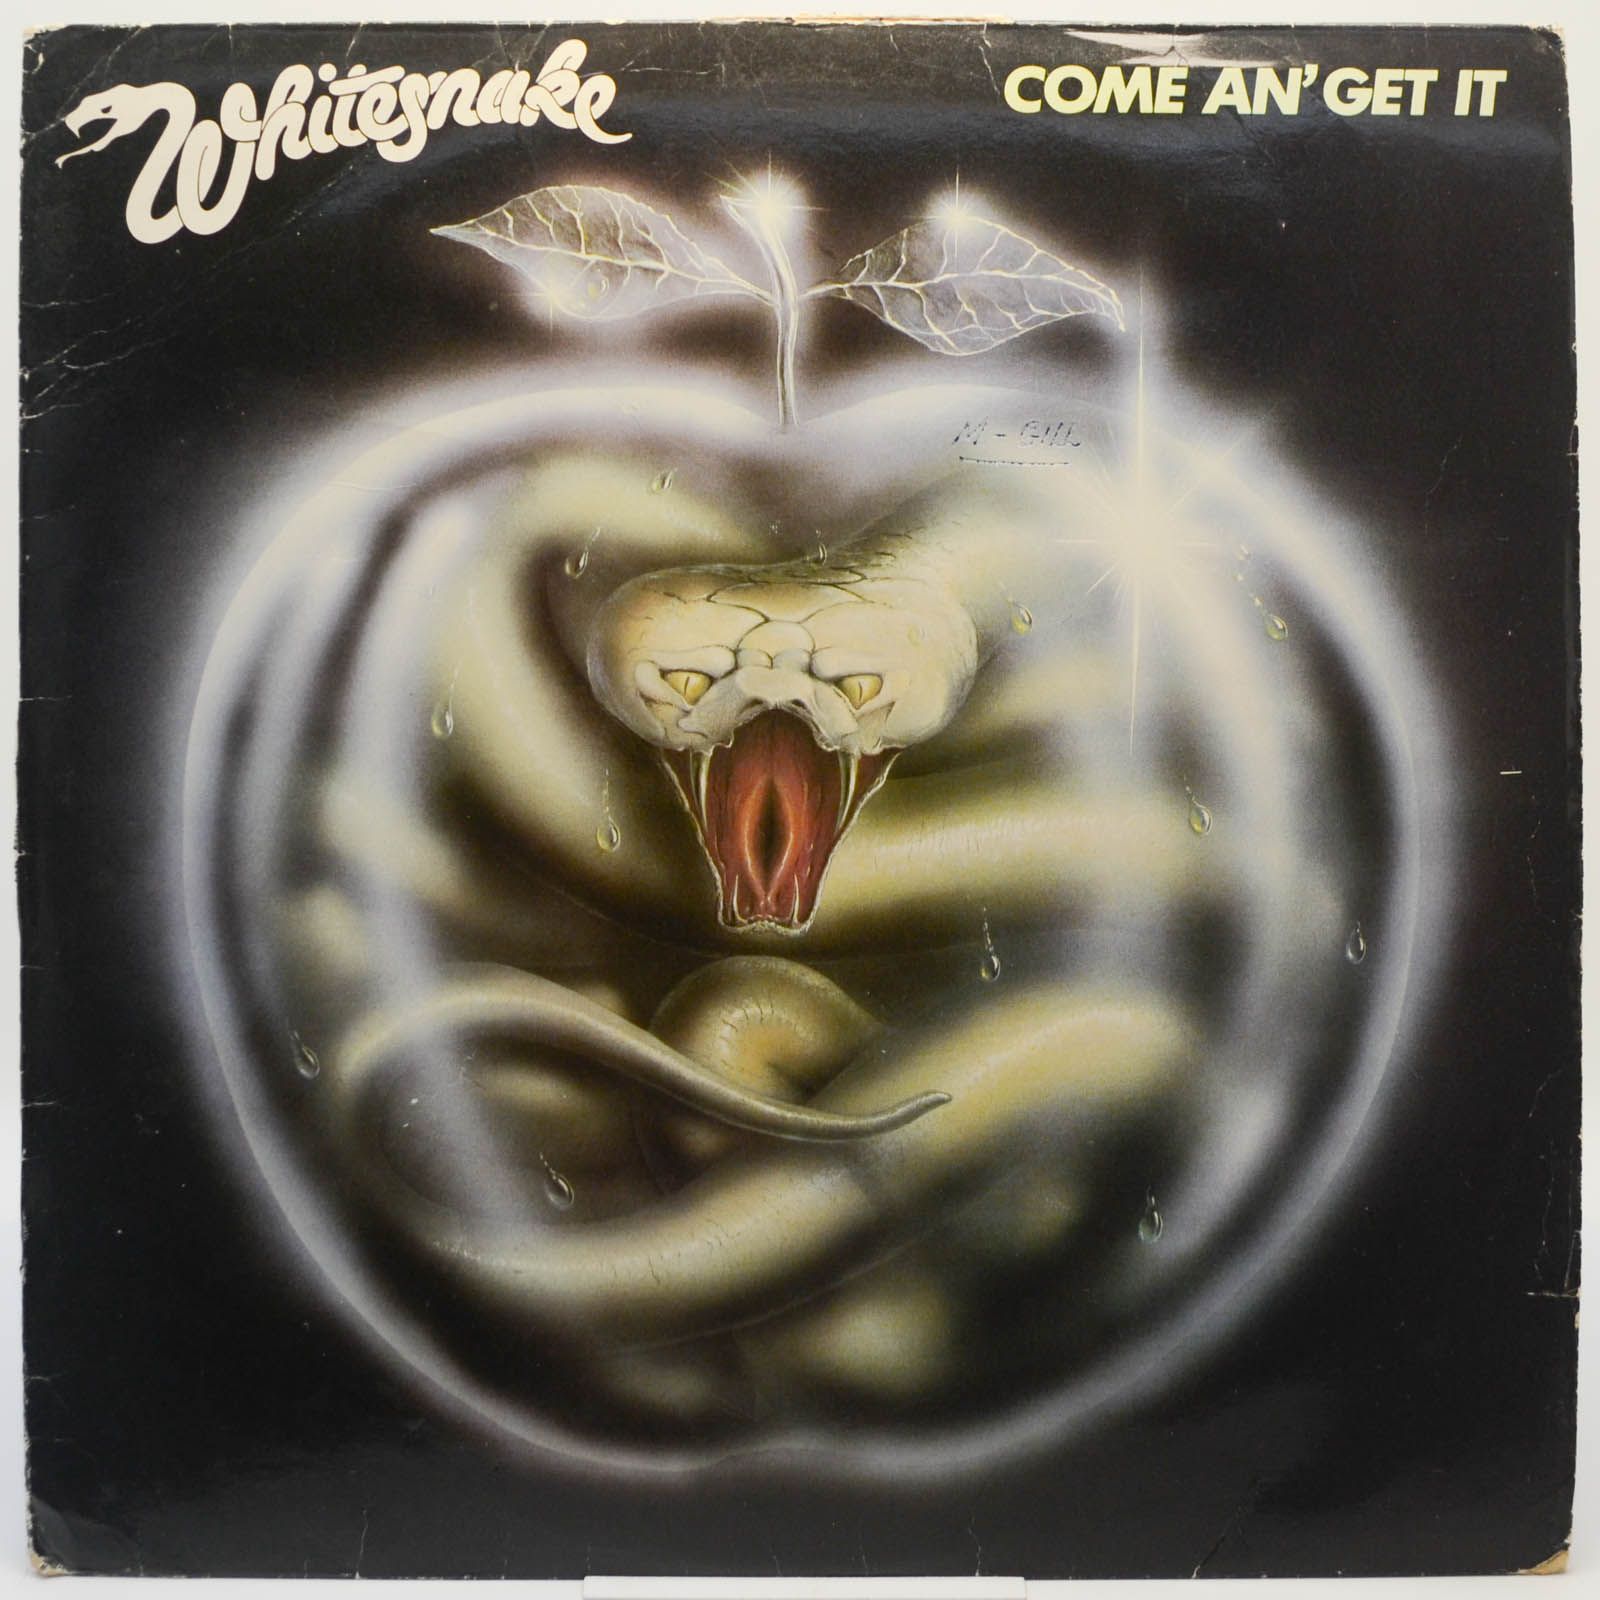 Whitesnake — Come An' Get It (1-st, UK), 1981